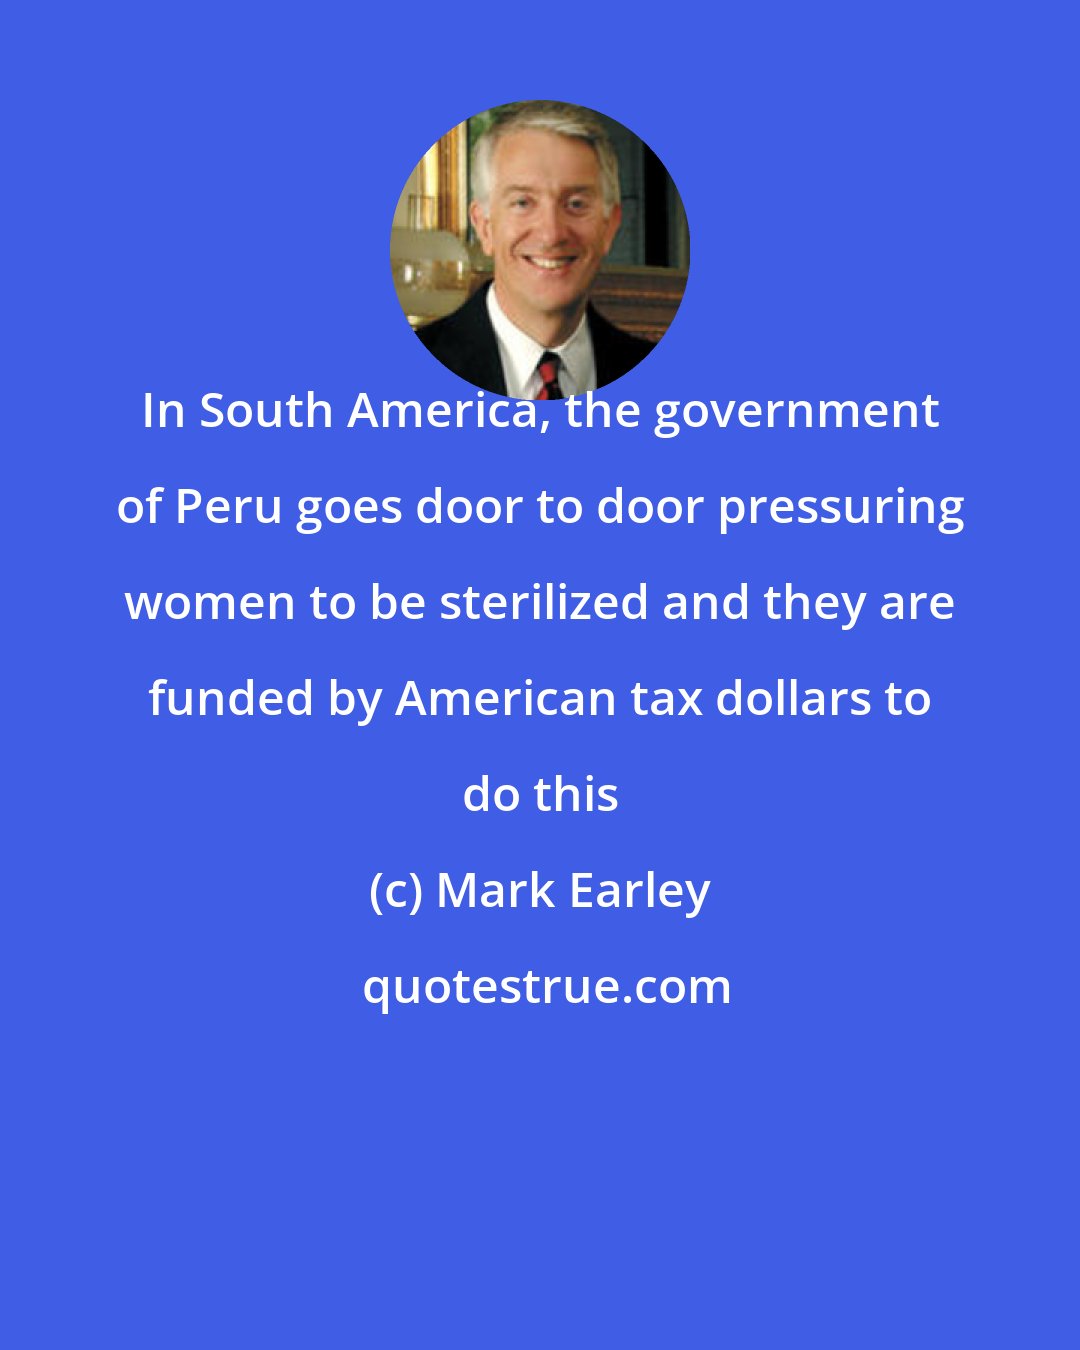 Mark Earley: In South America, the government of Peru goes door to door pressuring women to be sterilized and they are funded by American tax dollars to do this